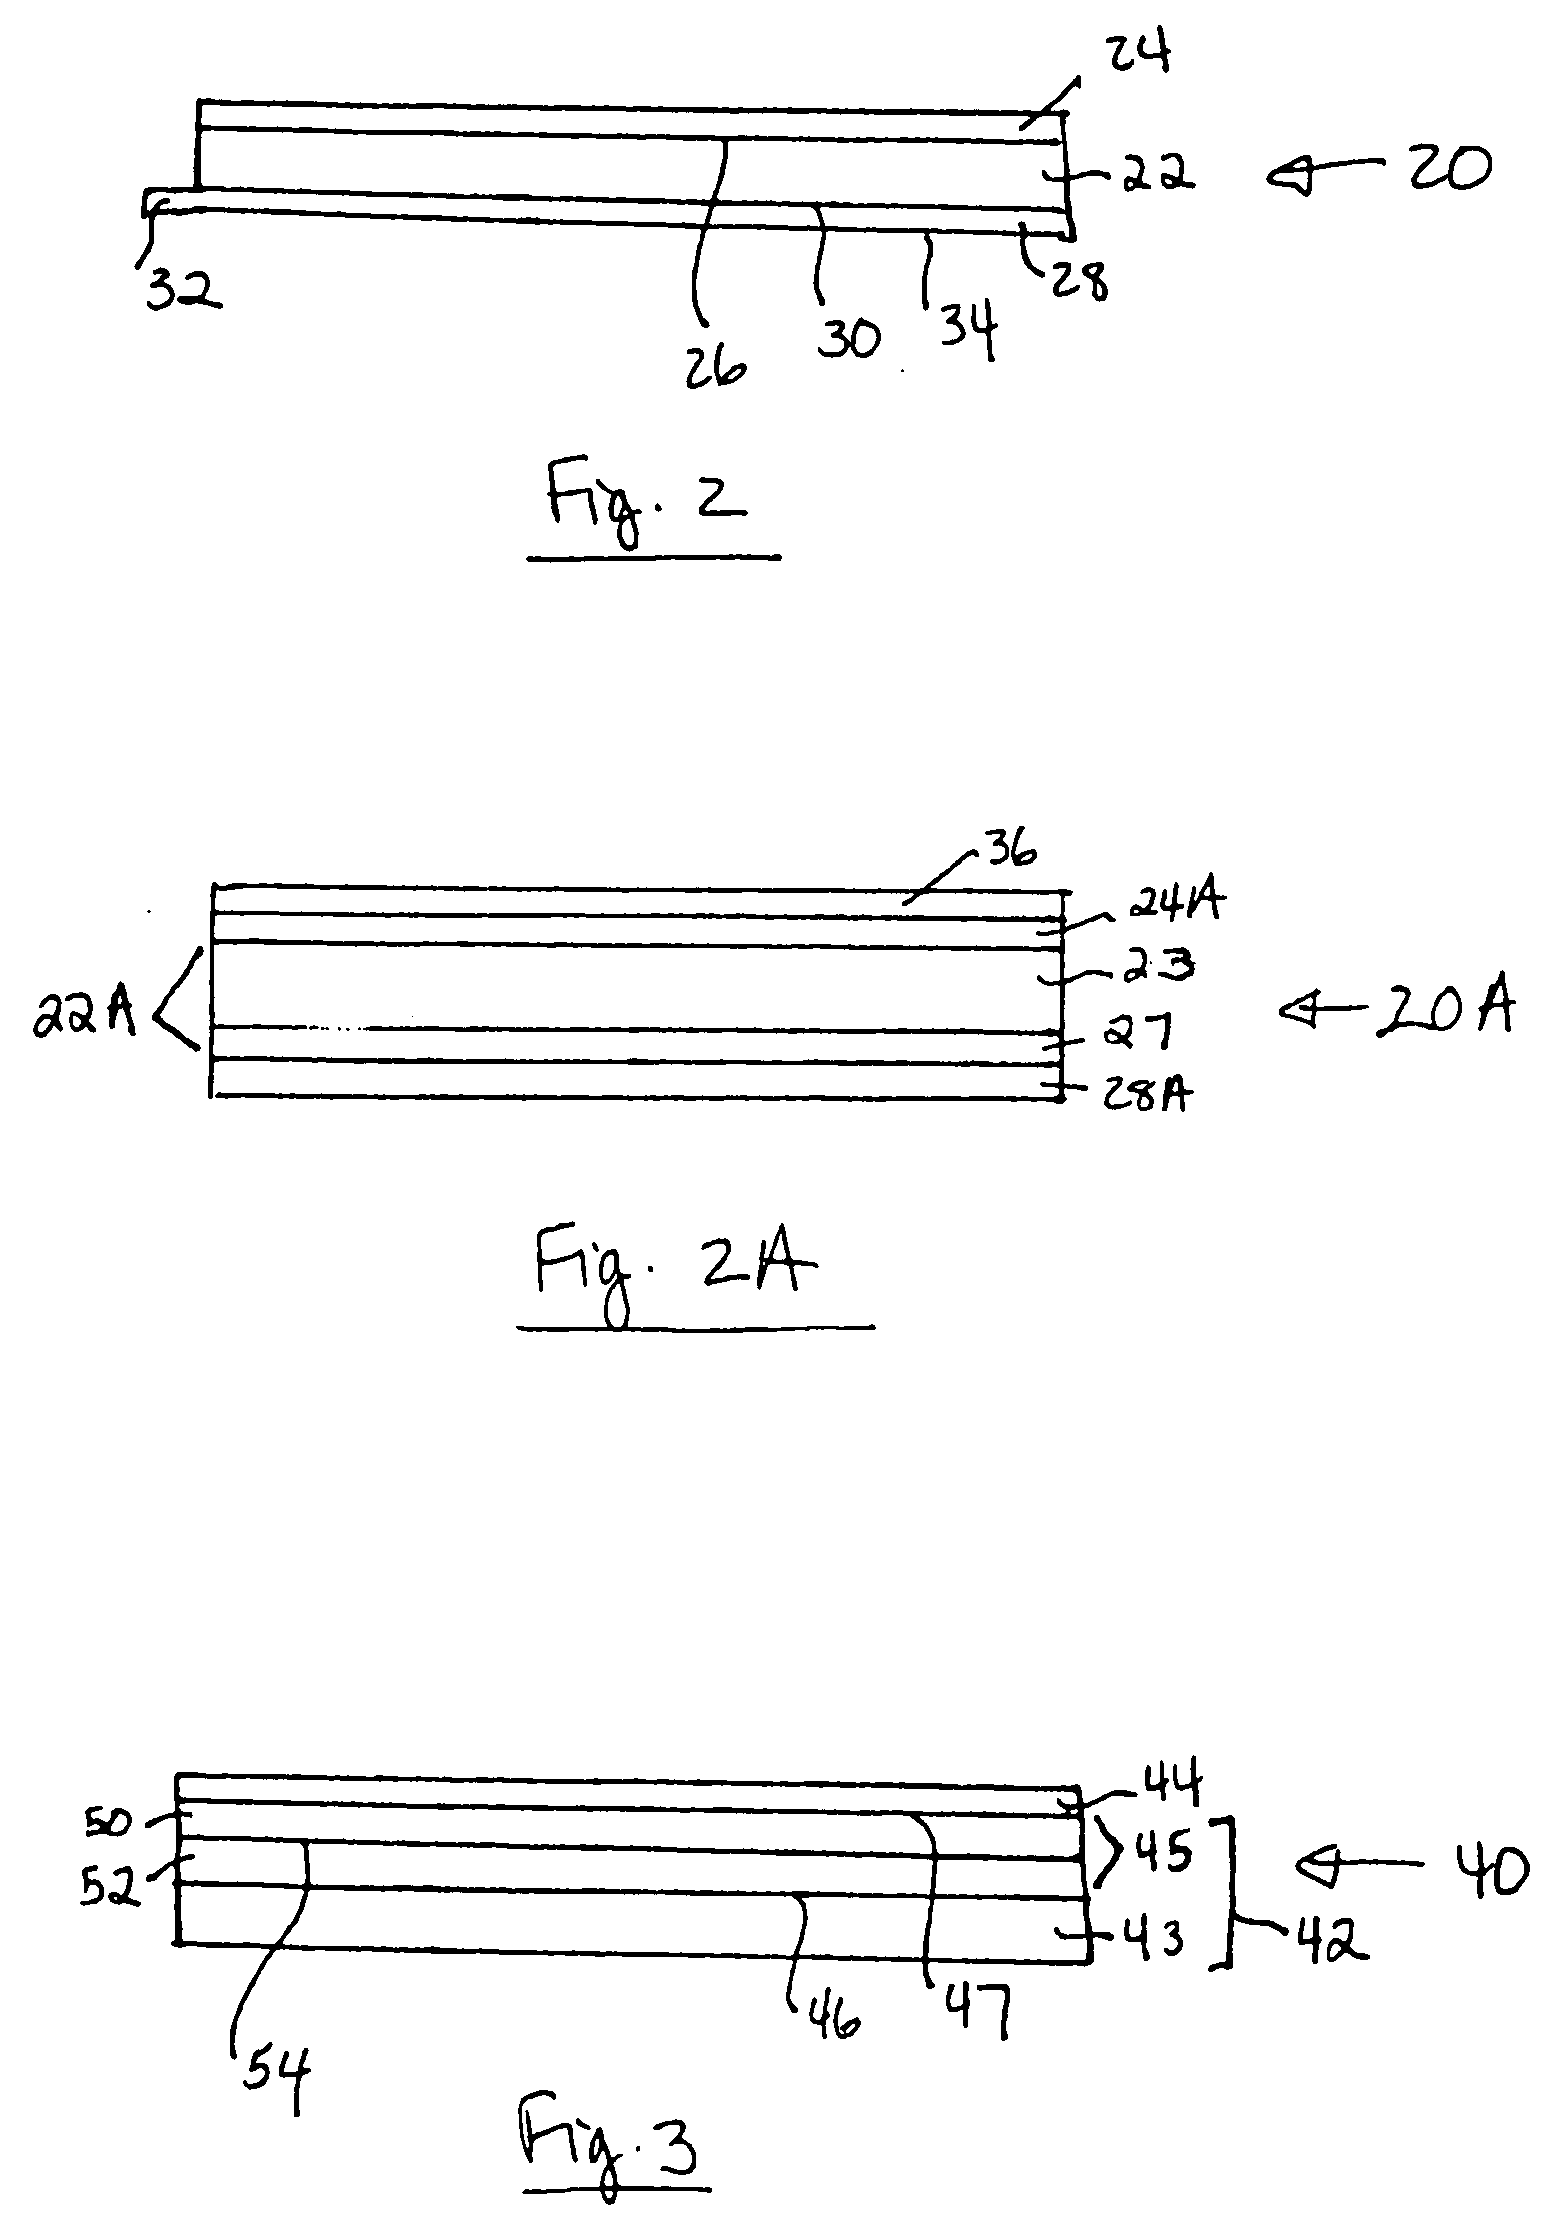 Articles and methods for applying color on surfaces